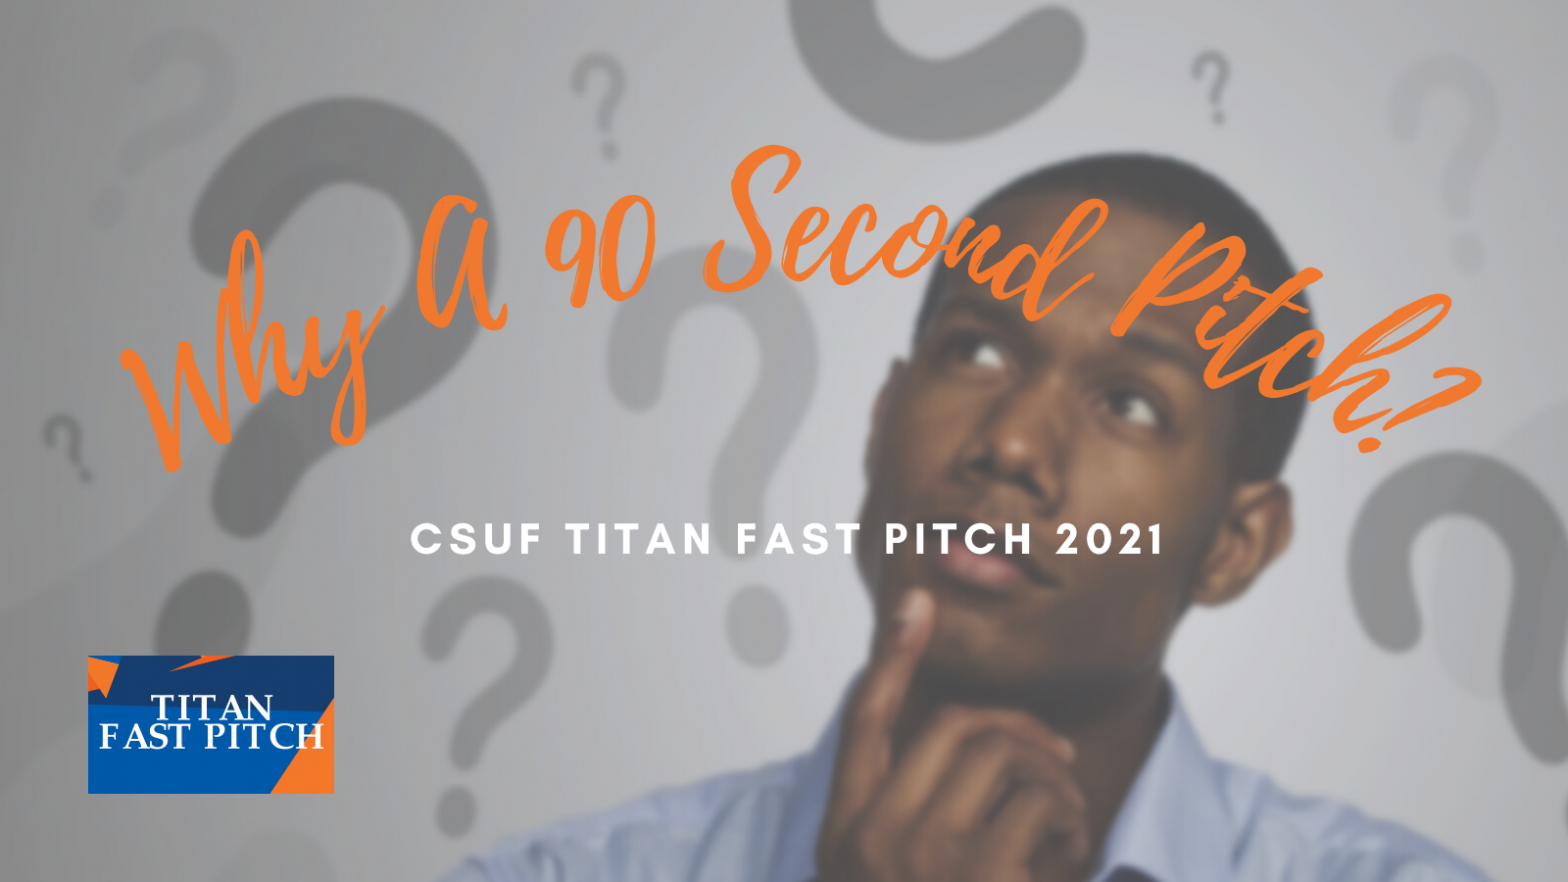 Why a 90 Second Pitch? – CSUF Titan Fast Pitch 2021